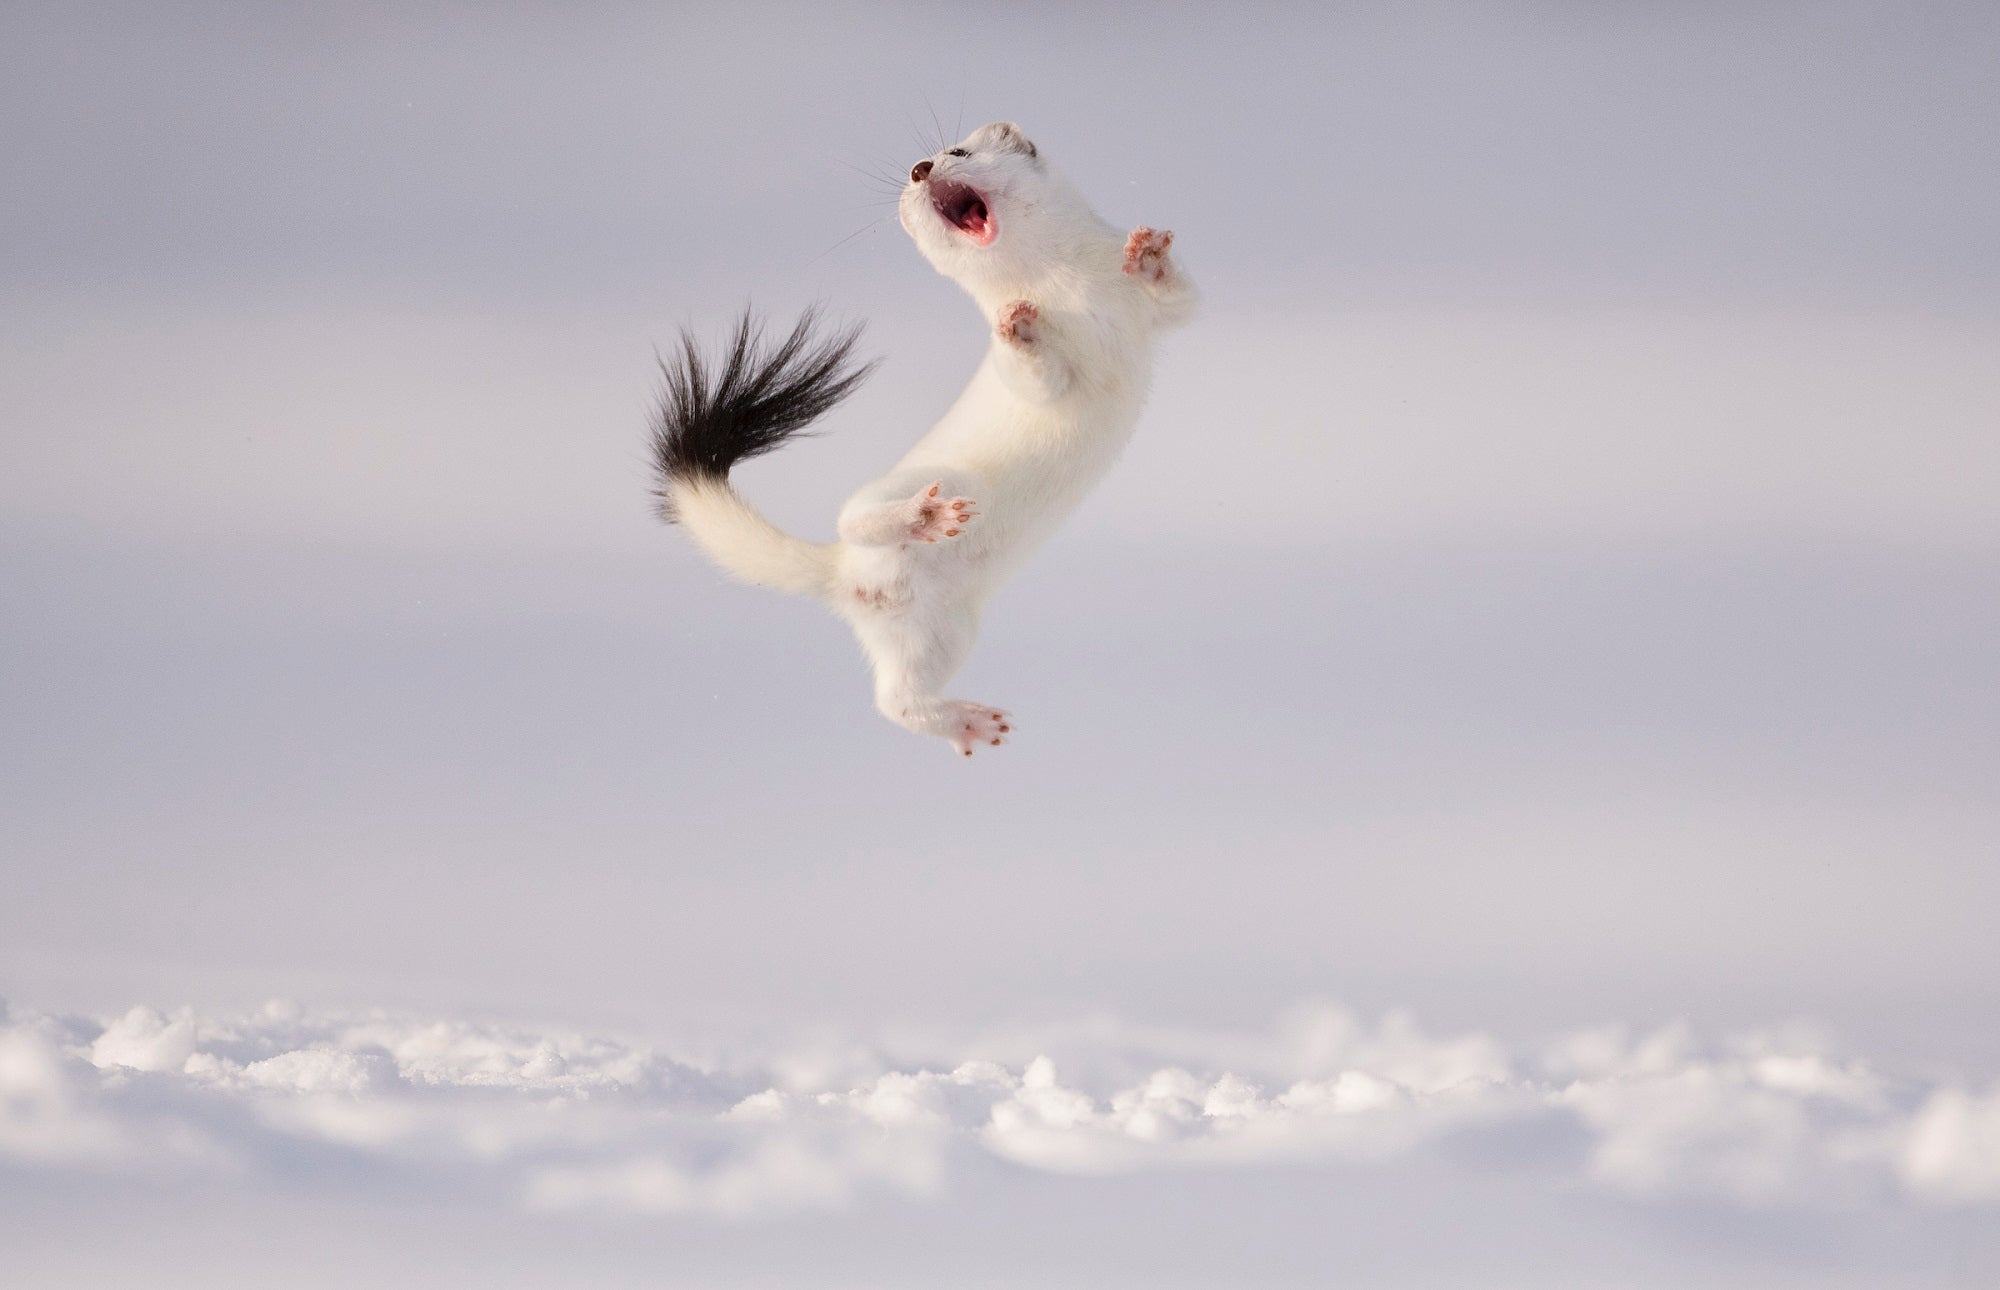 White stoat leaping above the snow with its mouth open